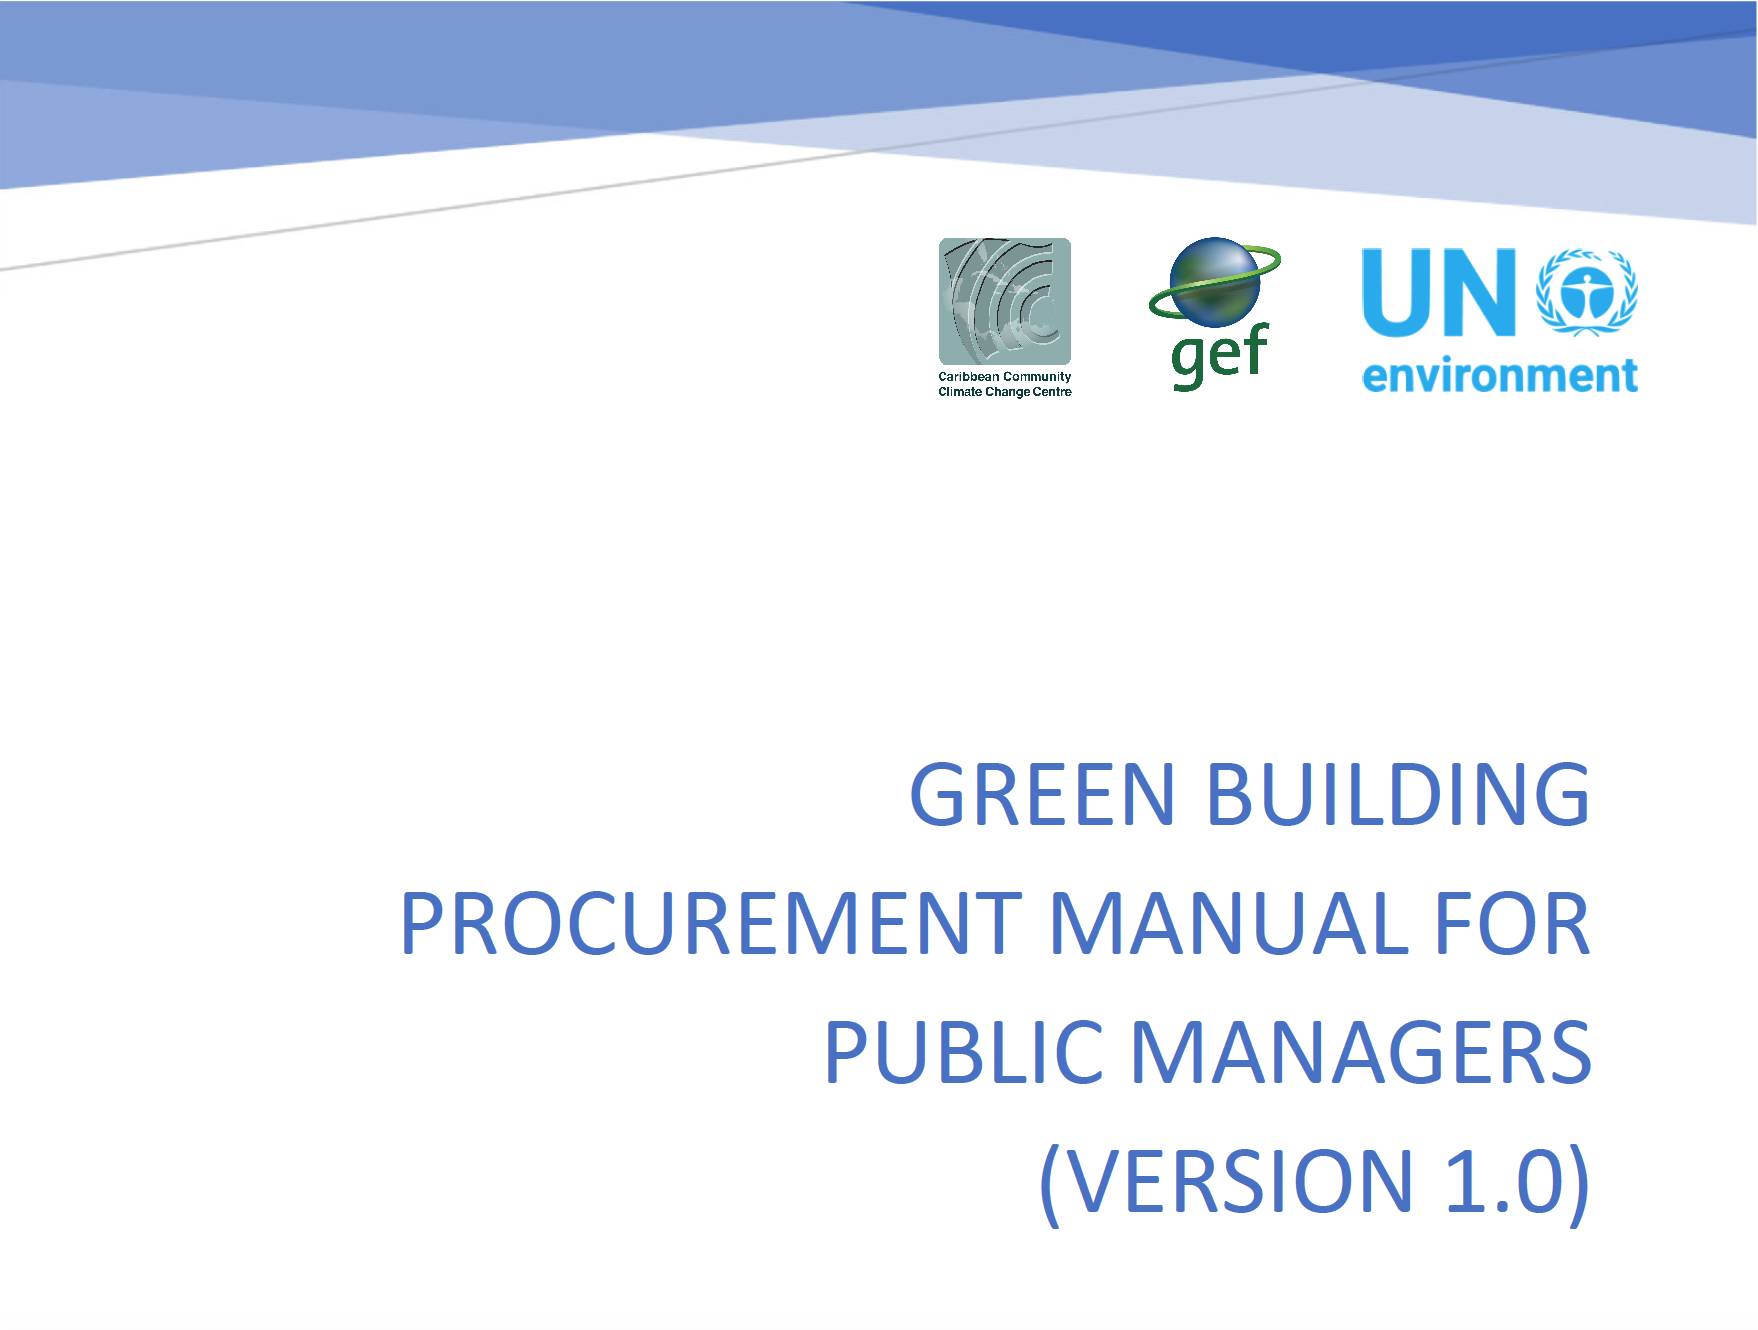 Green Building Procurement Manual for Public Managers